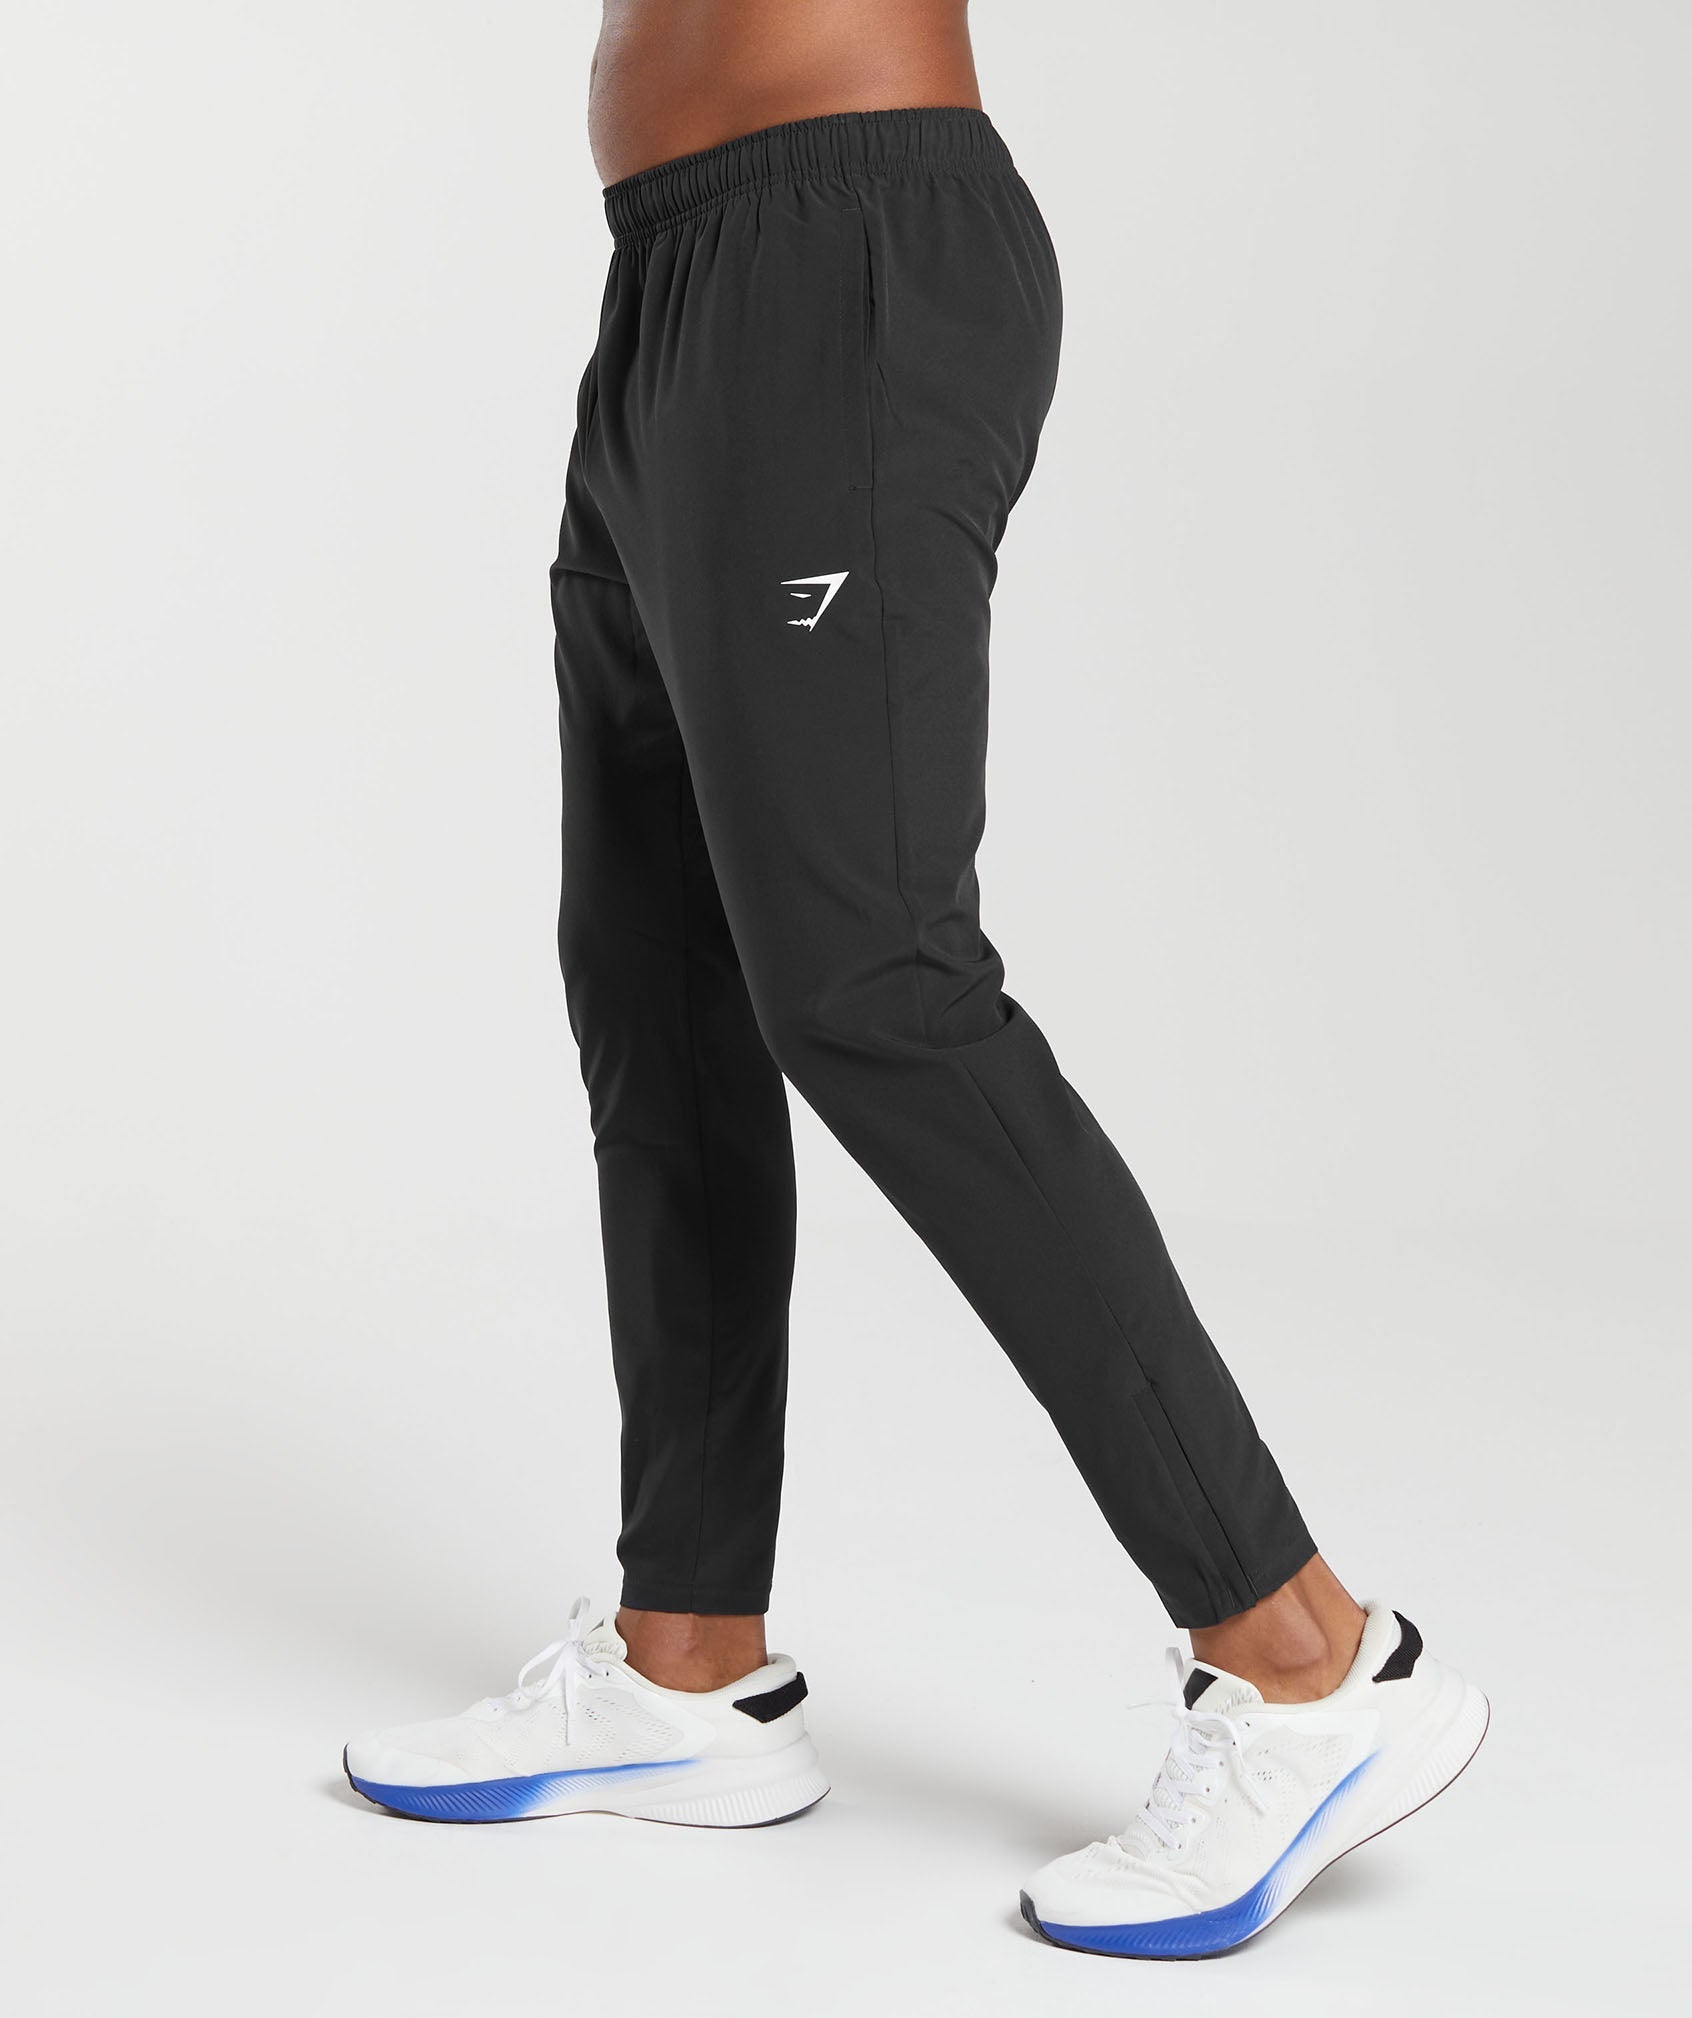 Arrival Woven Joggers in Black